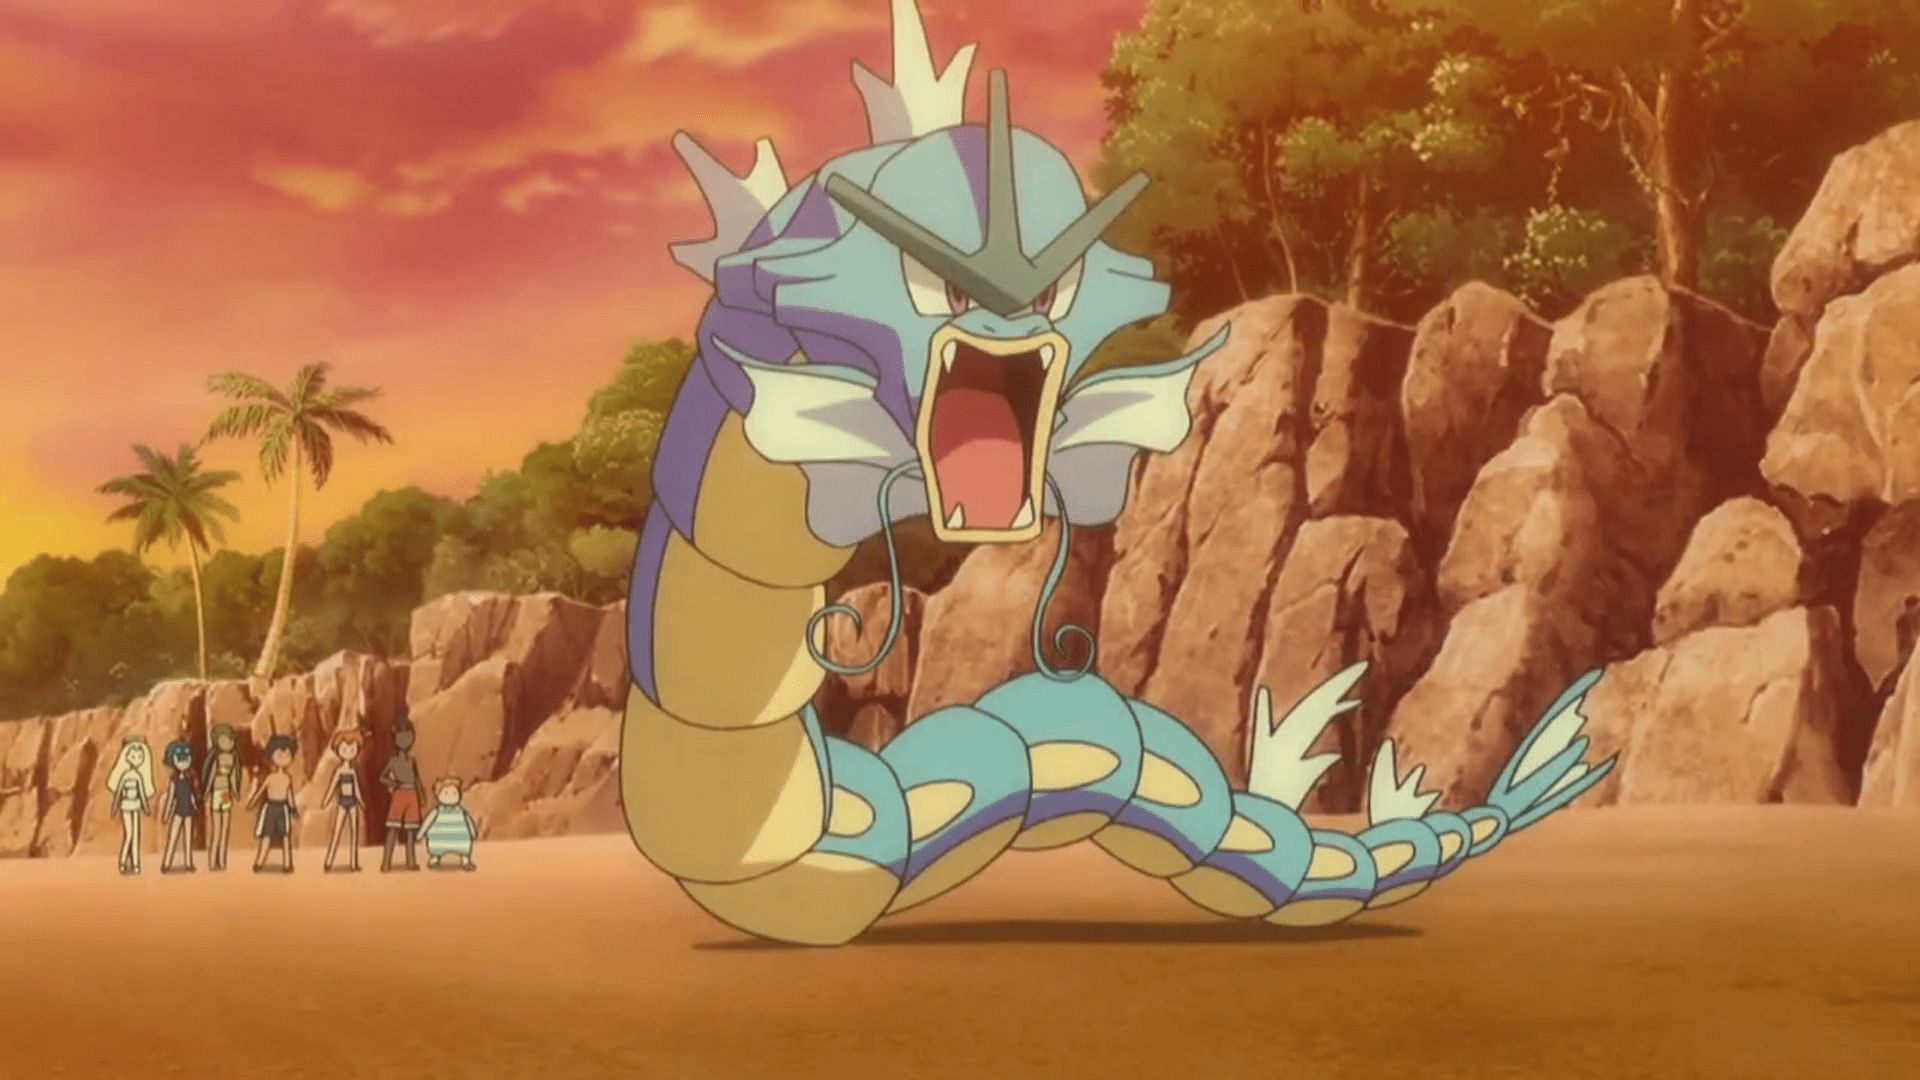 Gyarados as it appears in the anime. (Image via The Pokemon Company)